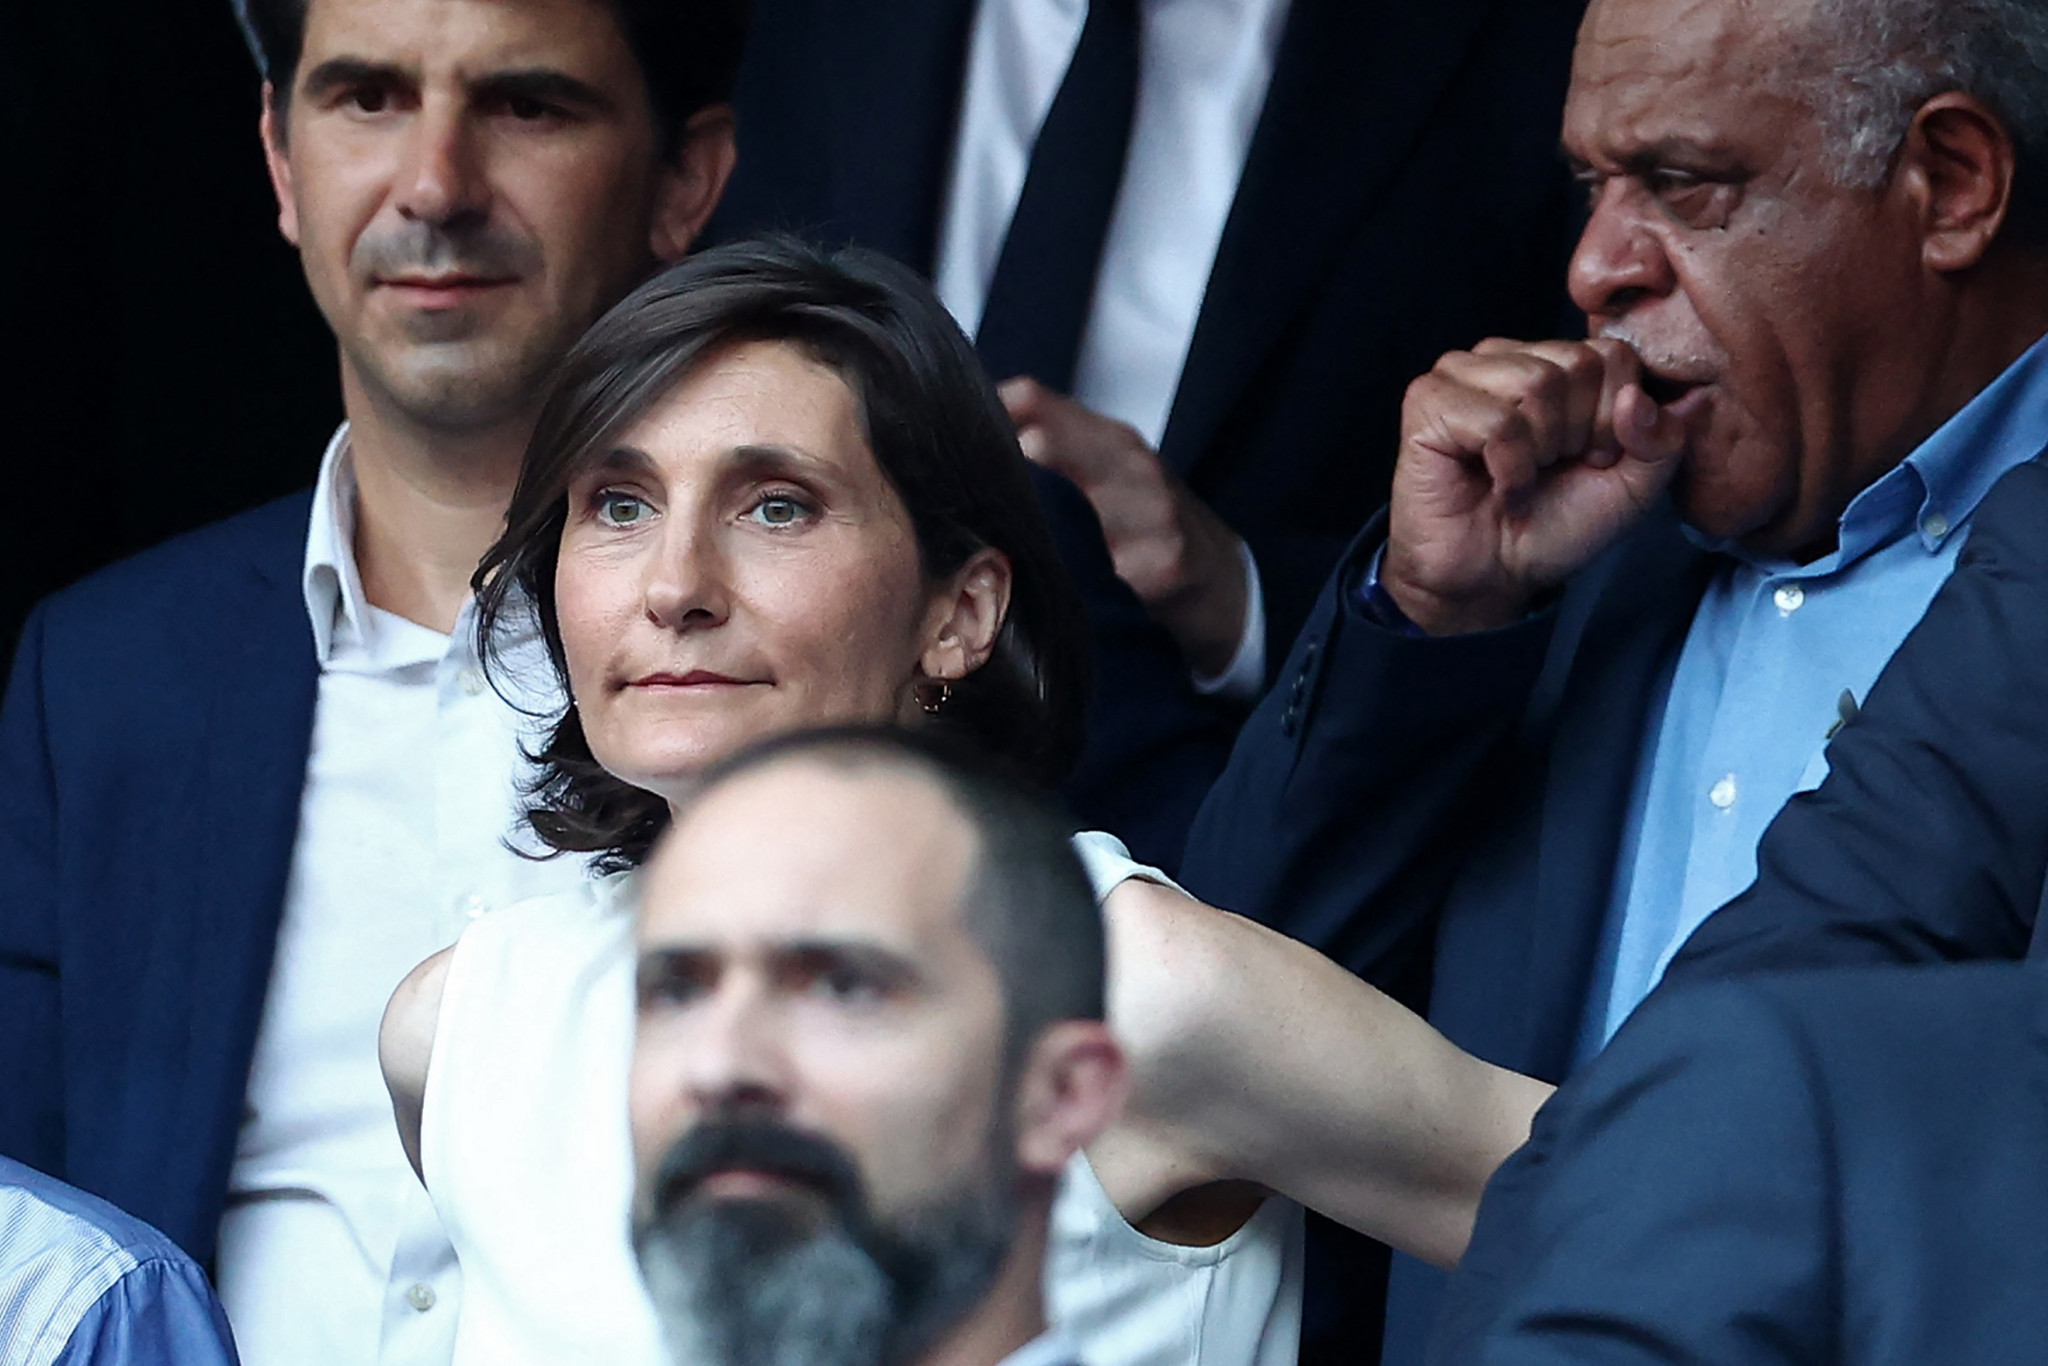 France's Sports Minister Amélie Oudéa-Castéra has played down concerns over the impact of inflation on the Olympics ©Getty Images